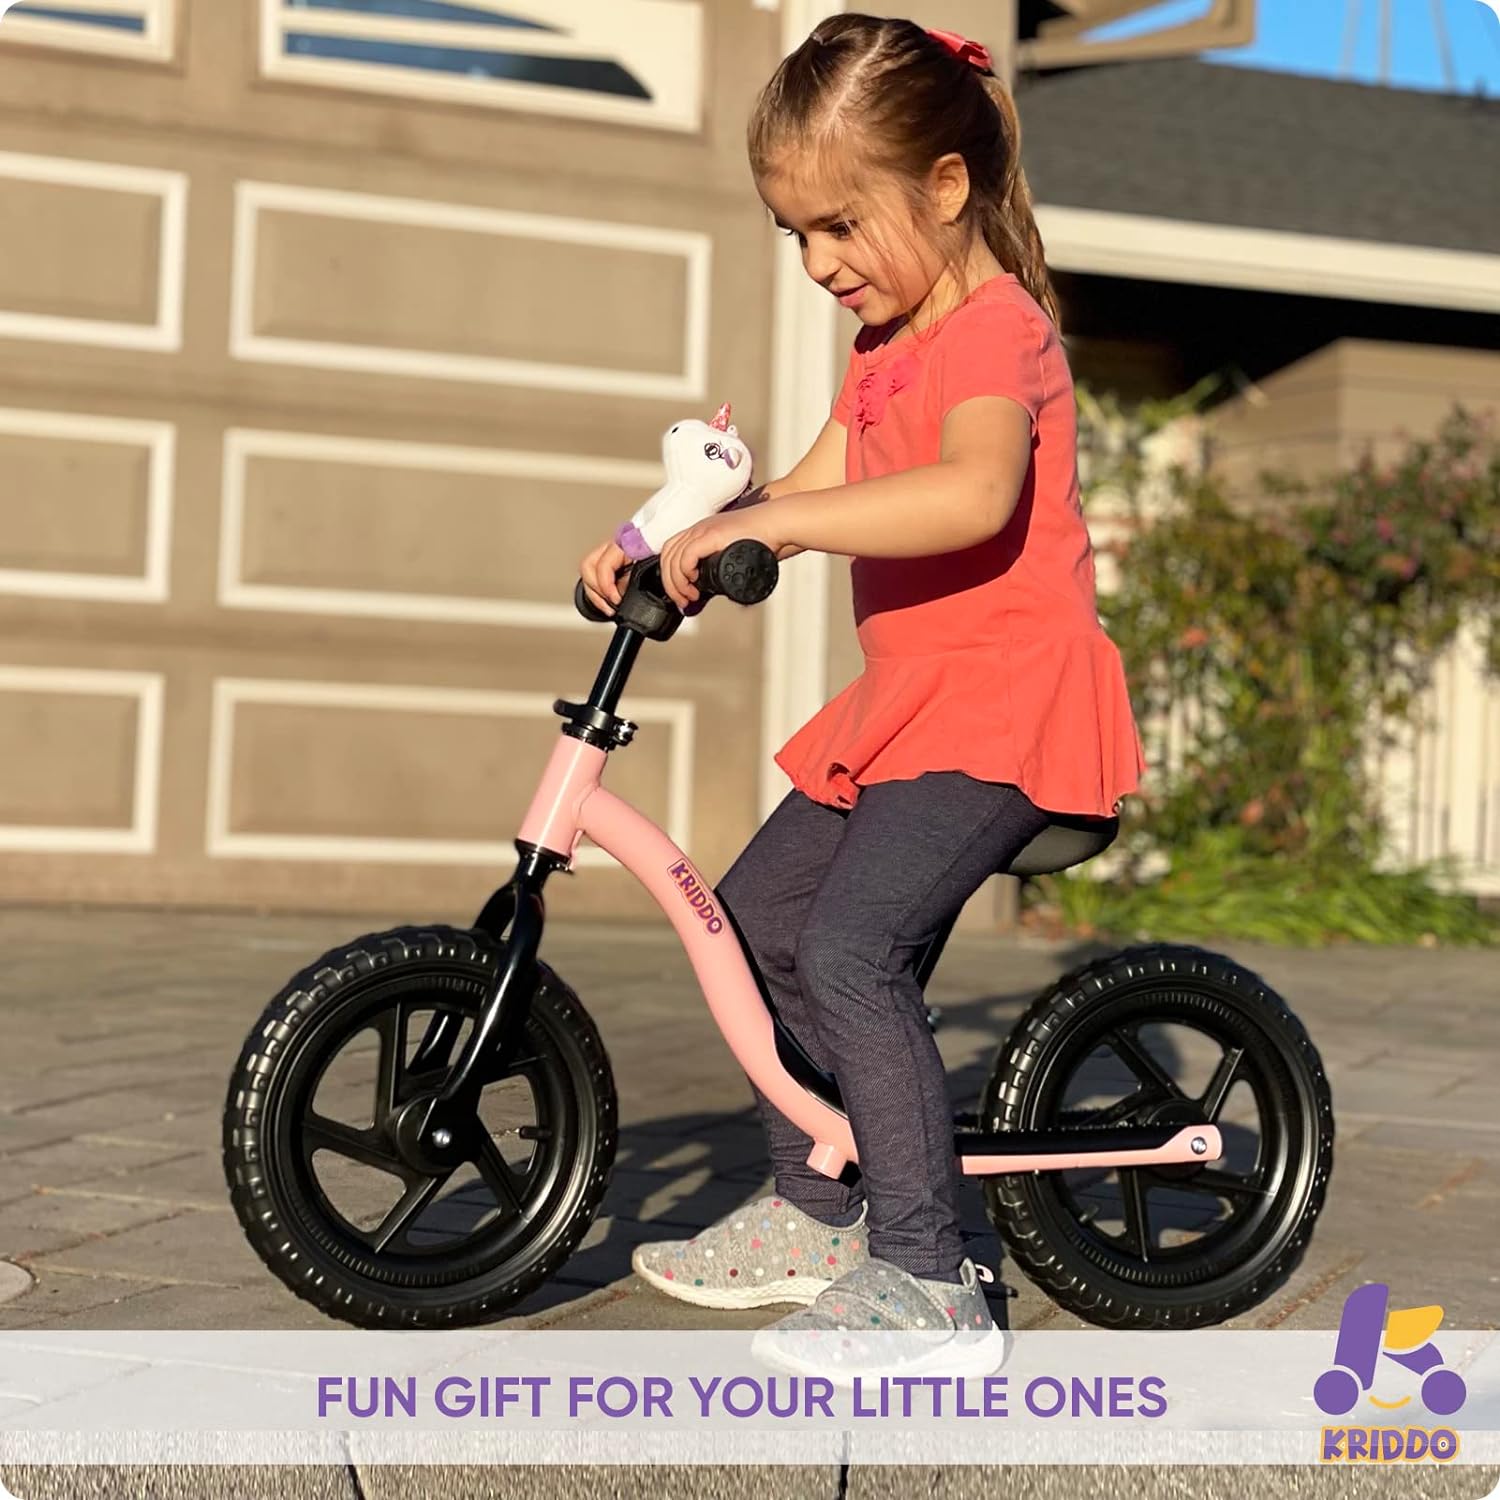 KRIDDO Toddler Balance Bike 2 Year Old, Age 18 Months to 5 Years Old, Early Learning Interactive Push Bicycle with Steady Balancing, Gift Bike for 2-5 Boys Girls